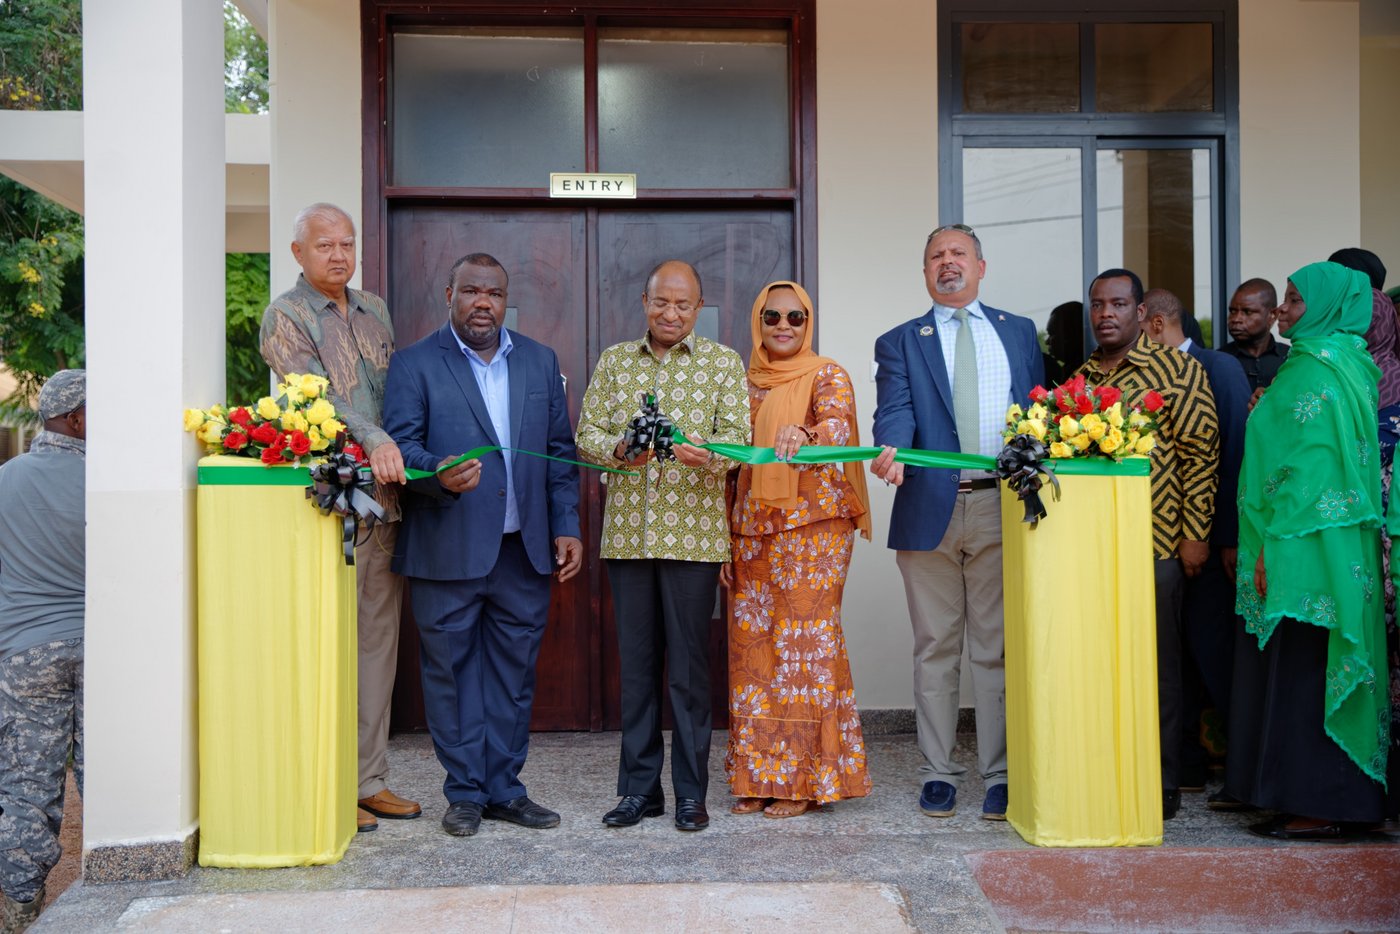 Eight country leaders cutting the ribbon on opening day of the new laboratory in Zanzibar, Tanzania